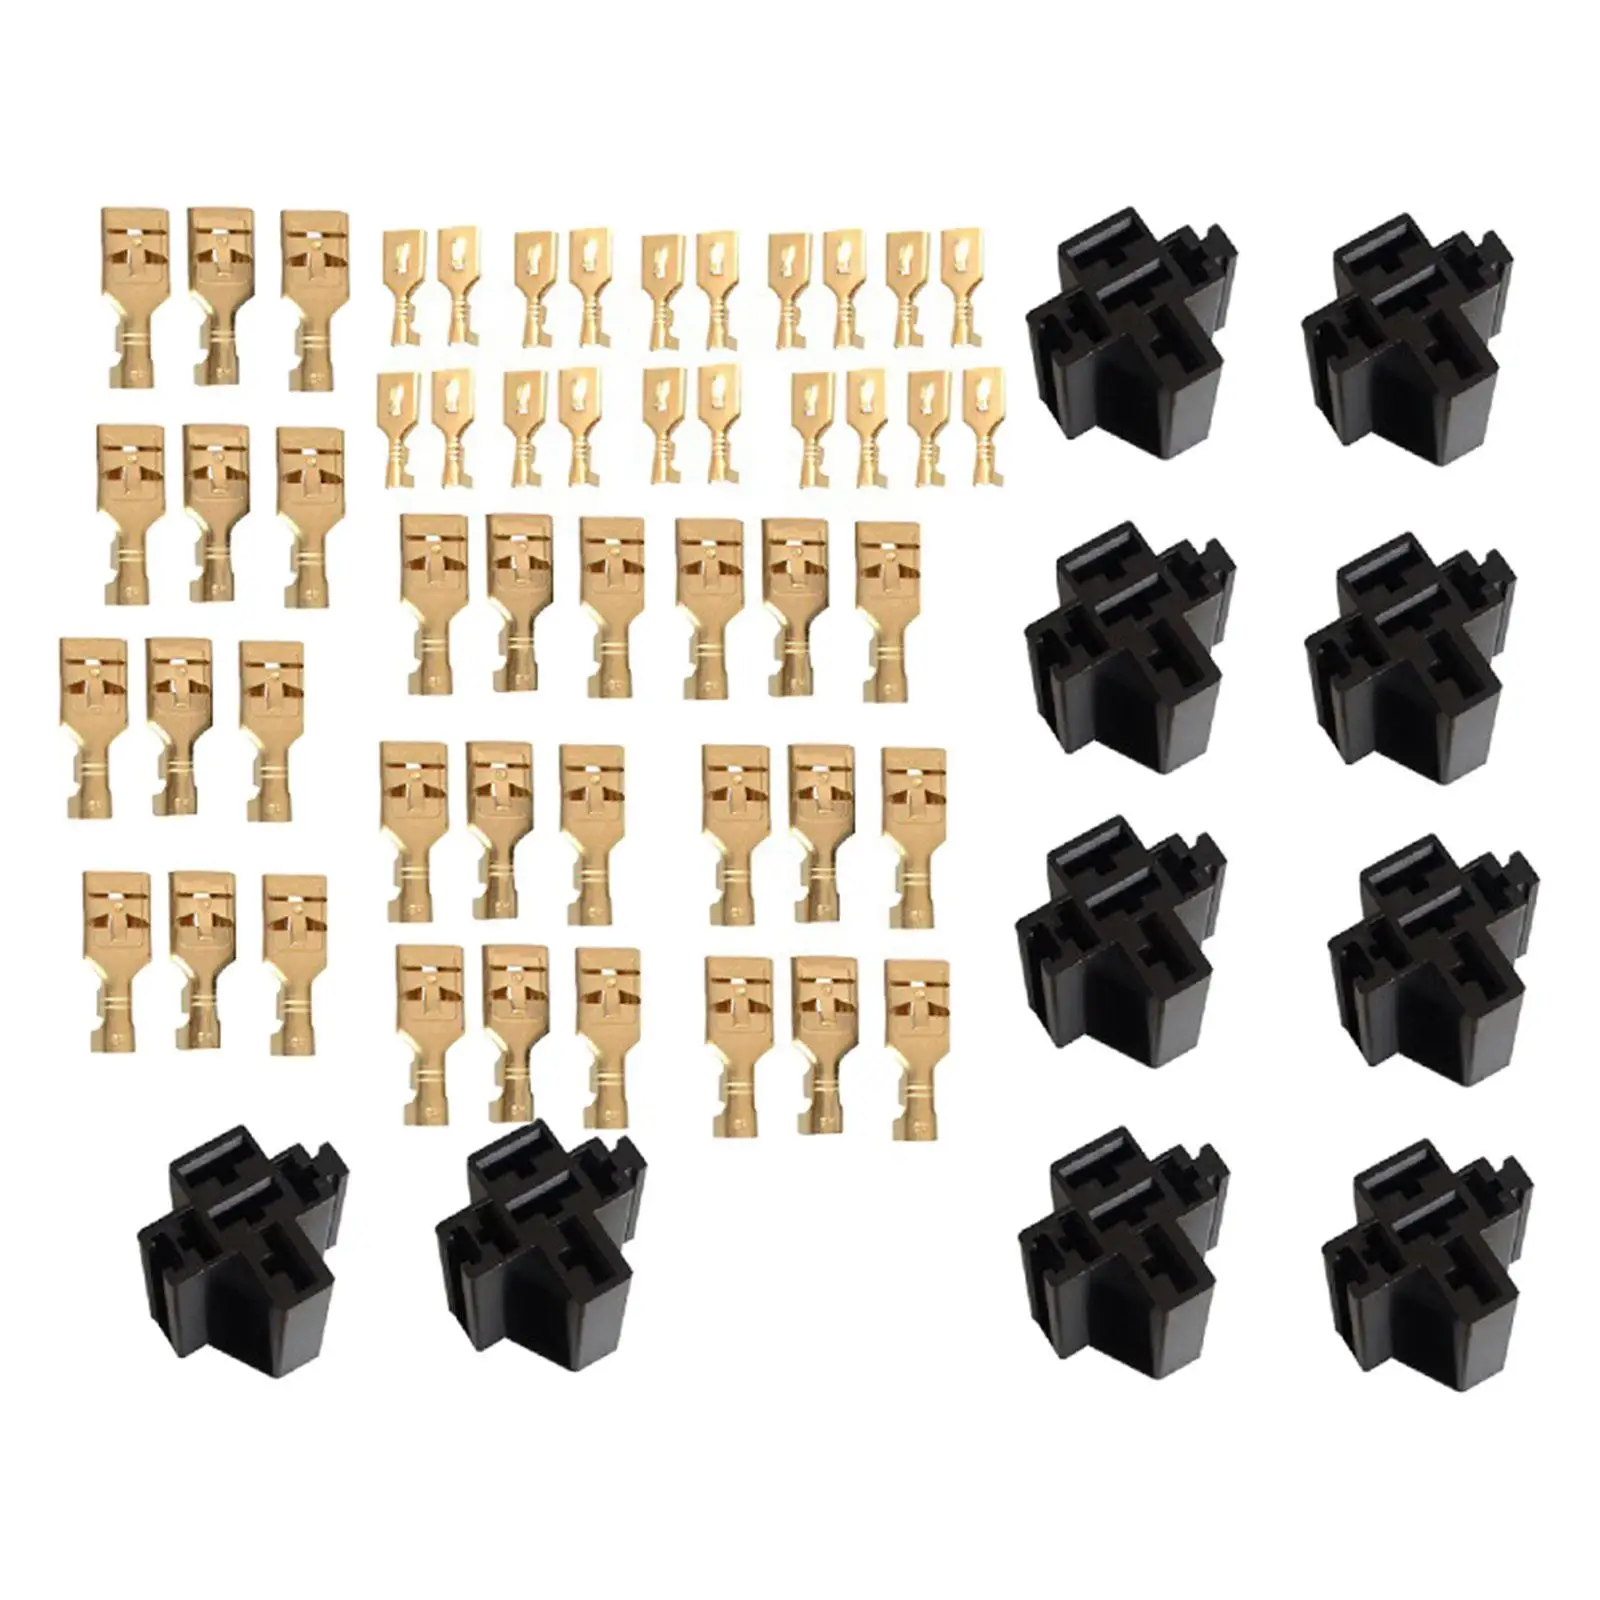 10x 5 Pin Car Relay Socket Holders 80A Replace Parts for Cars Vehicles